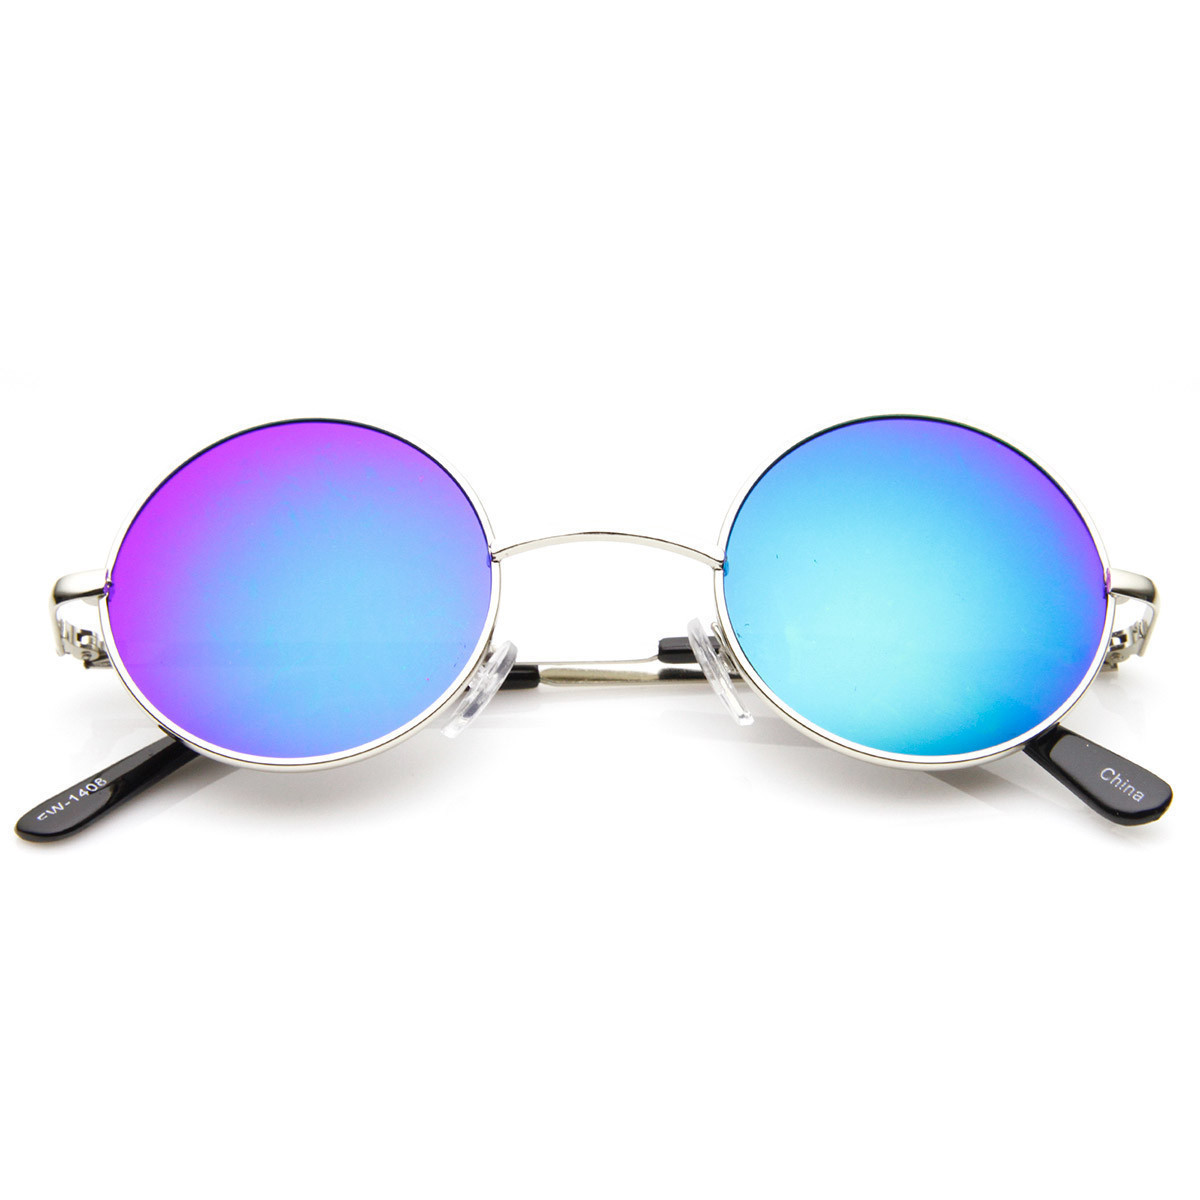 Lennon Style Round Circle Metal Sunglasses With Color Mirror Lens - 1408 - Silver Fire